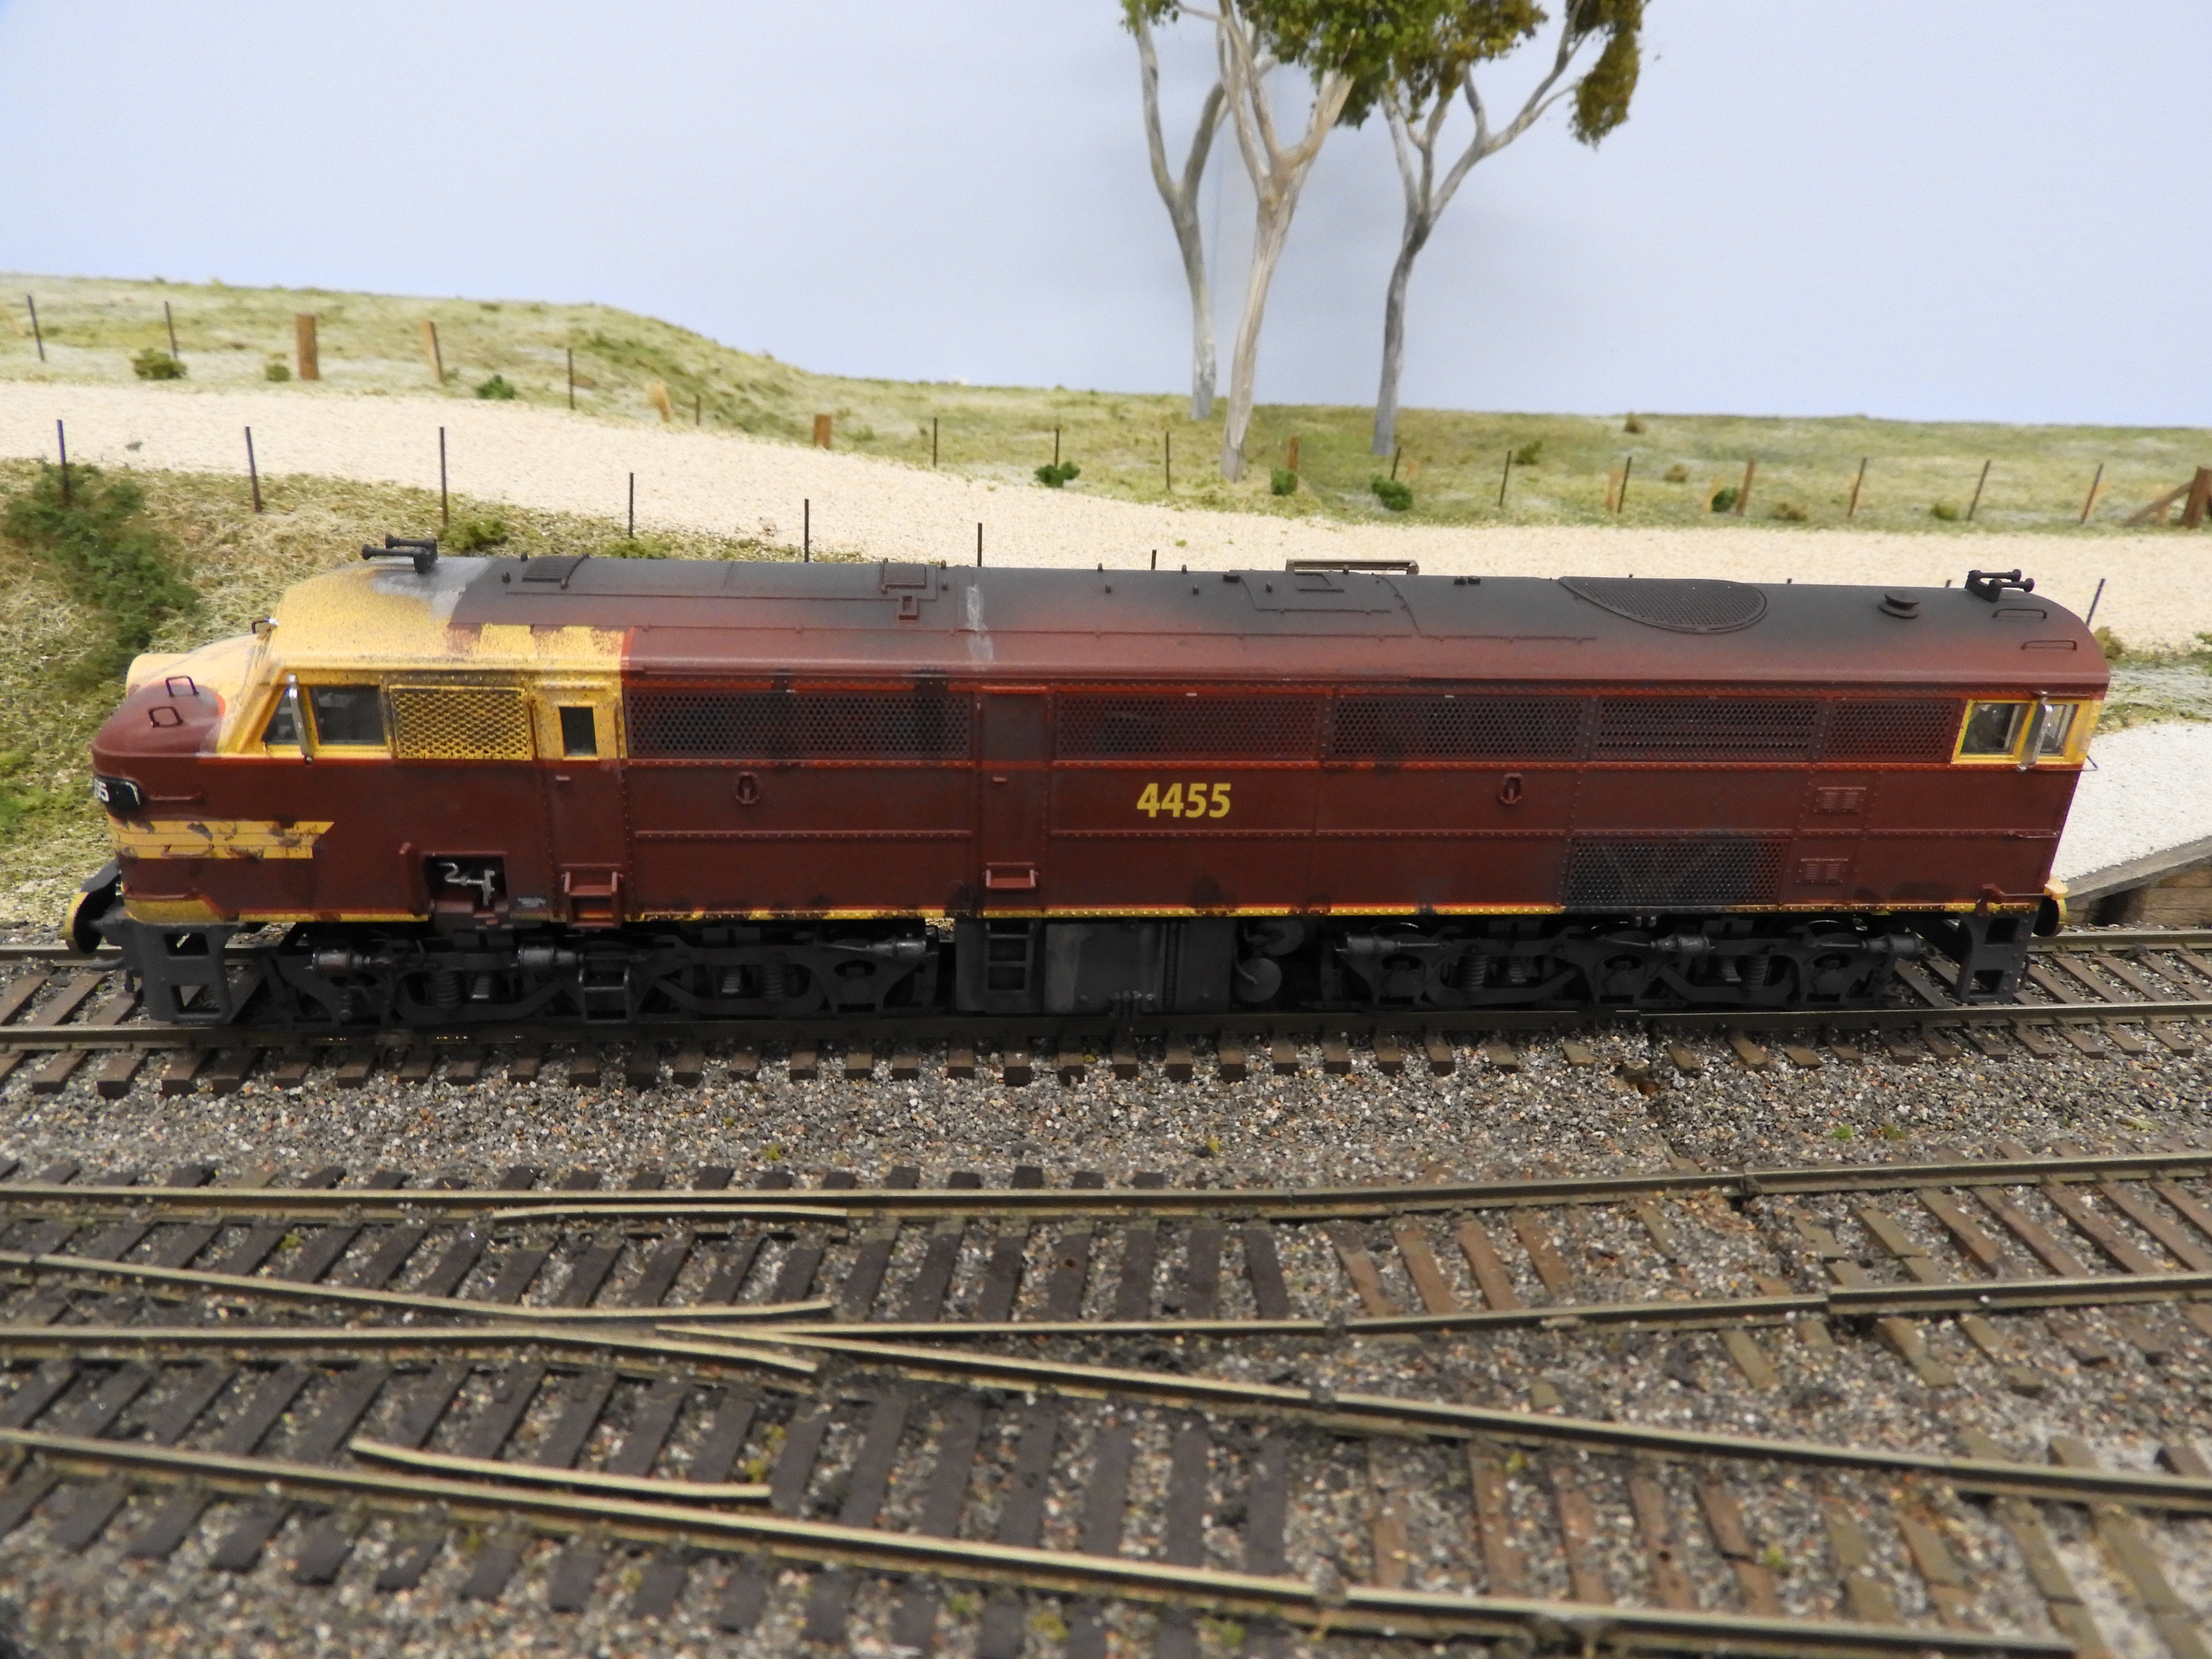 NSW 44 CLASS HO SCALE - 4455 (ORIGINAL) - WEATHERED - $350 each